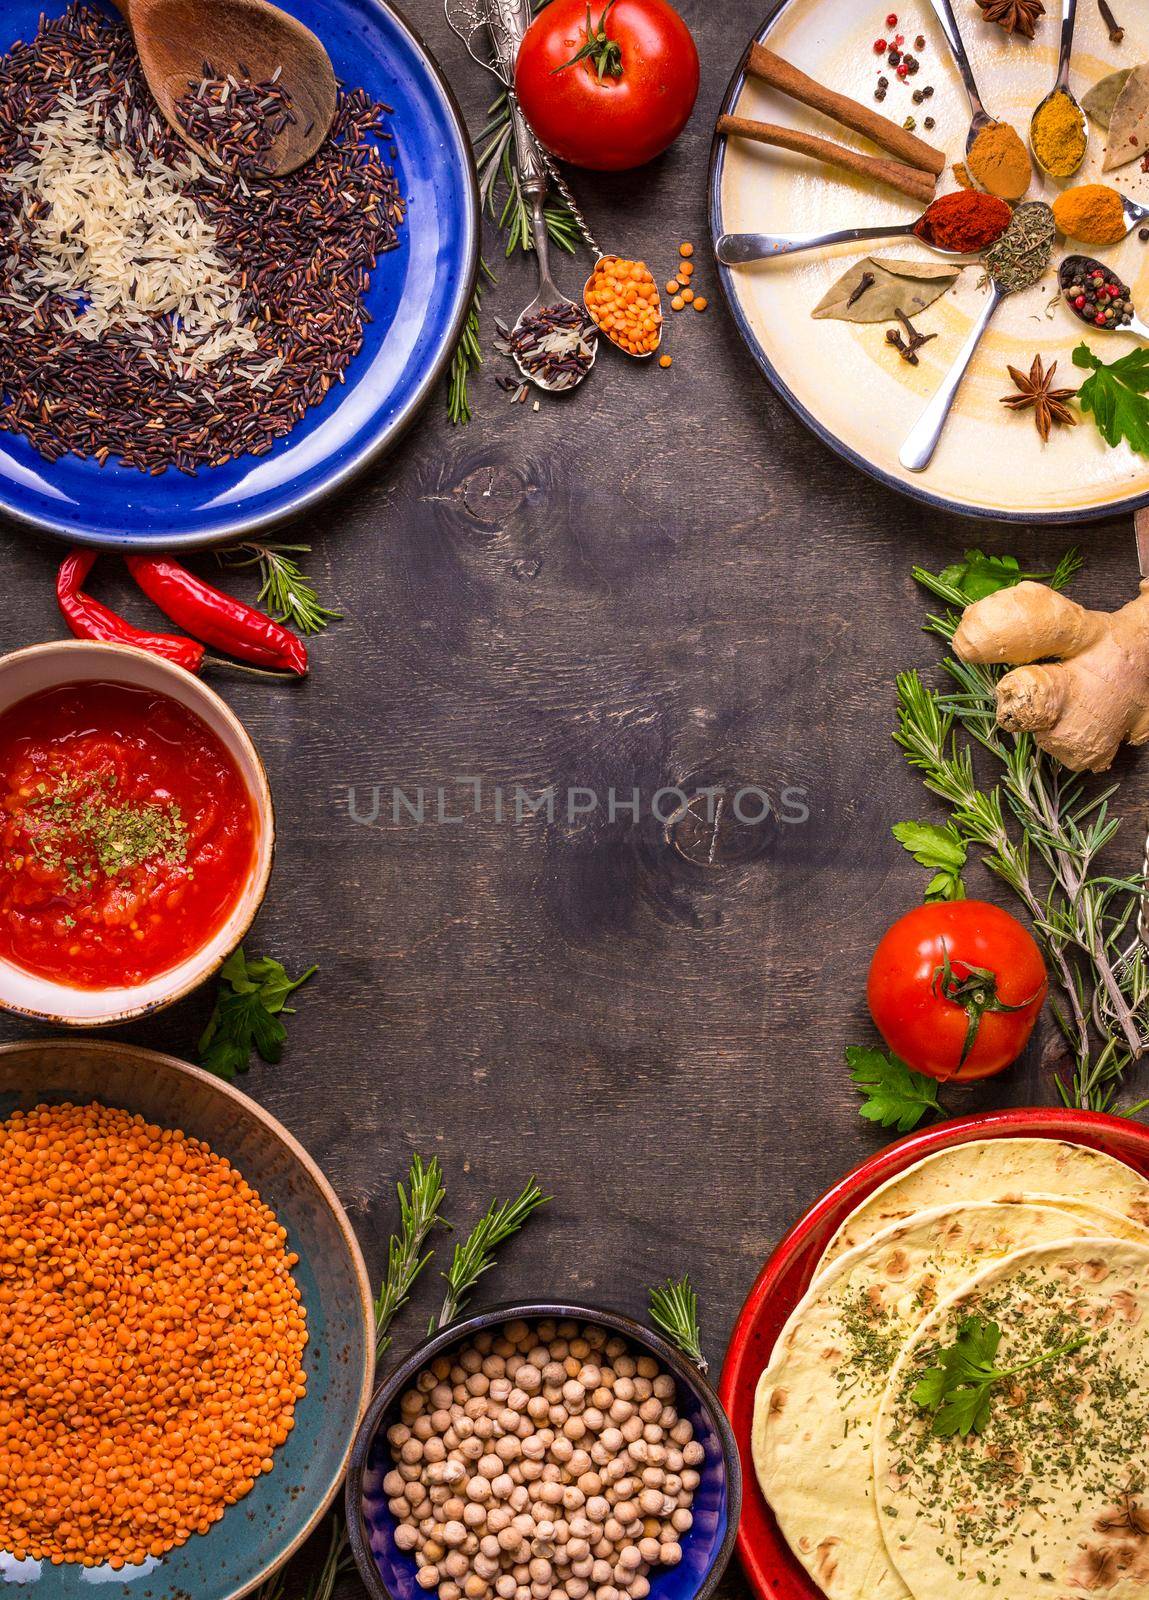 Ingredients for indian or eastern cuisine by its_al_dente